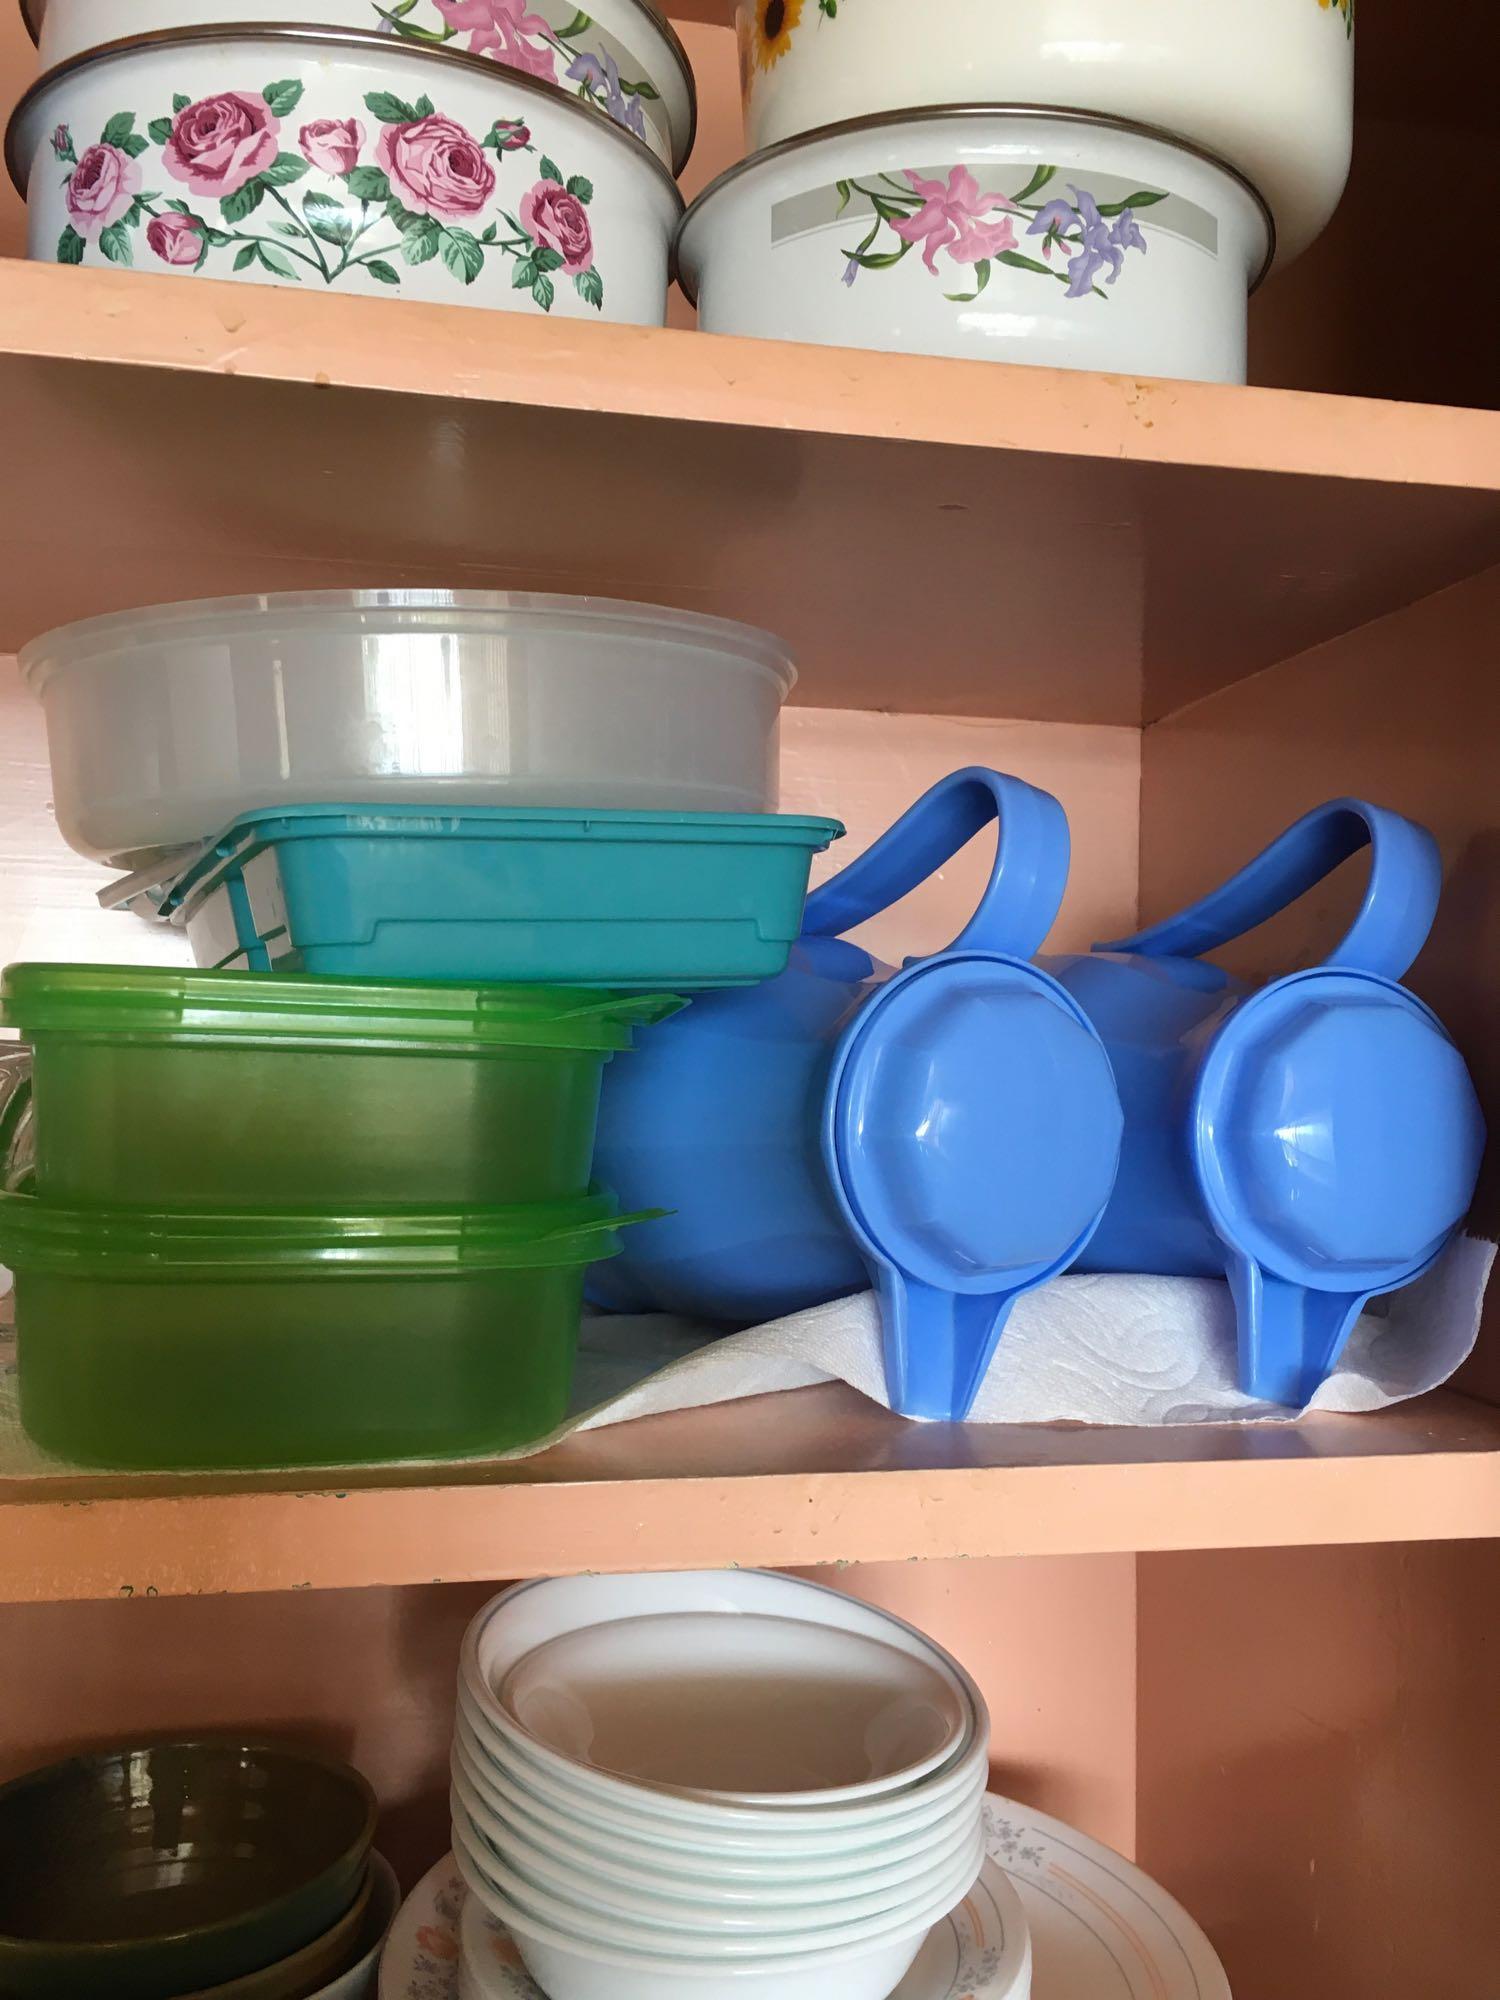 Lot of Assorted kitchen wear